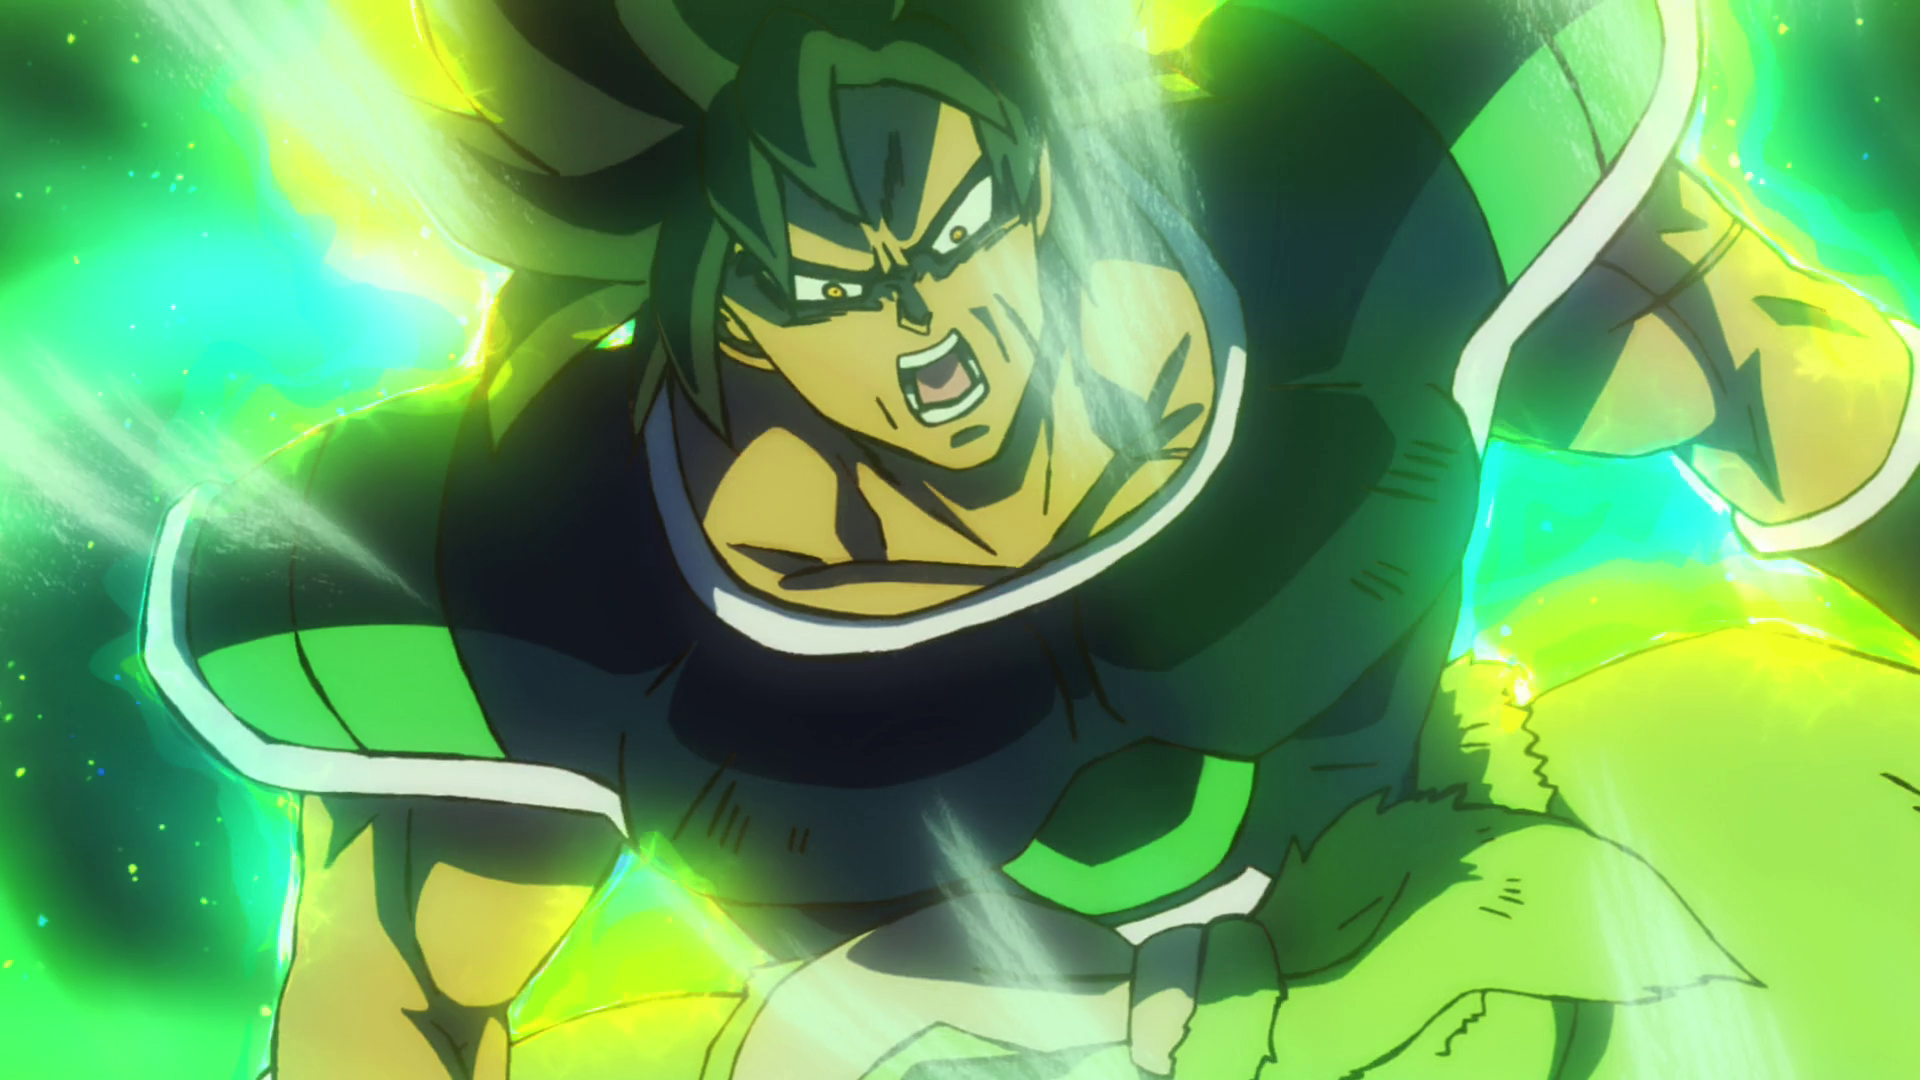 Broly (Vic Mignogna) discovers his father has been killed in Dragon Ball Super: Broly (2018), Toei Animation